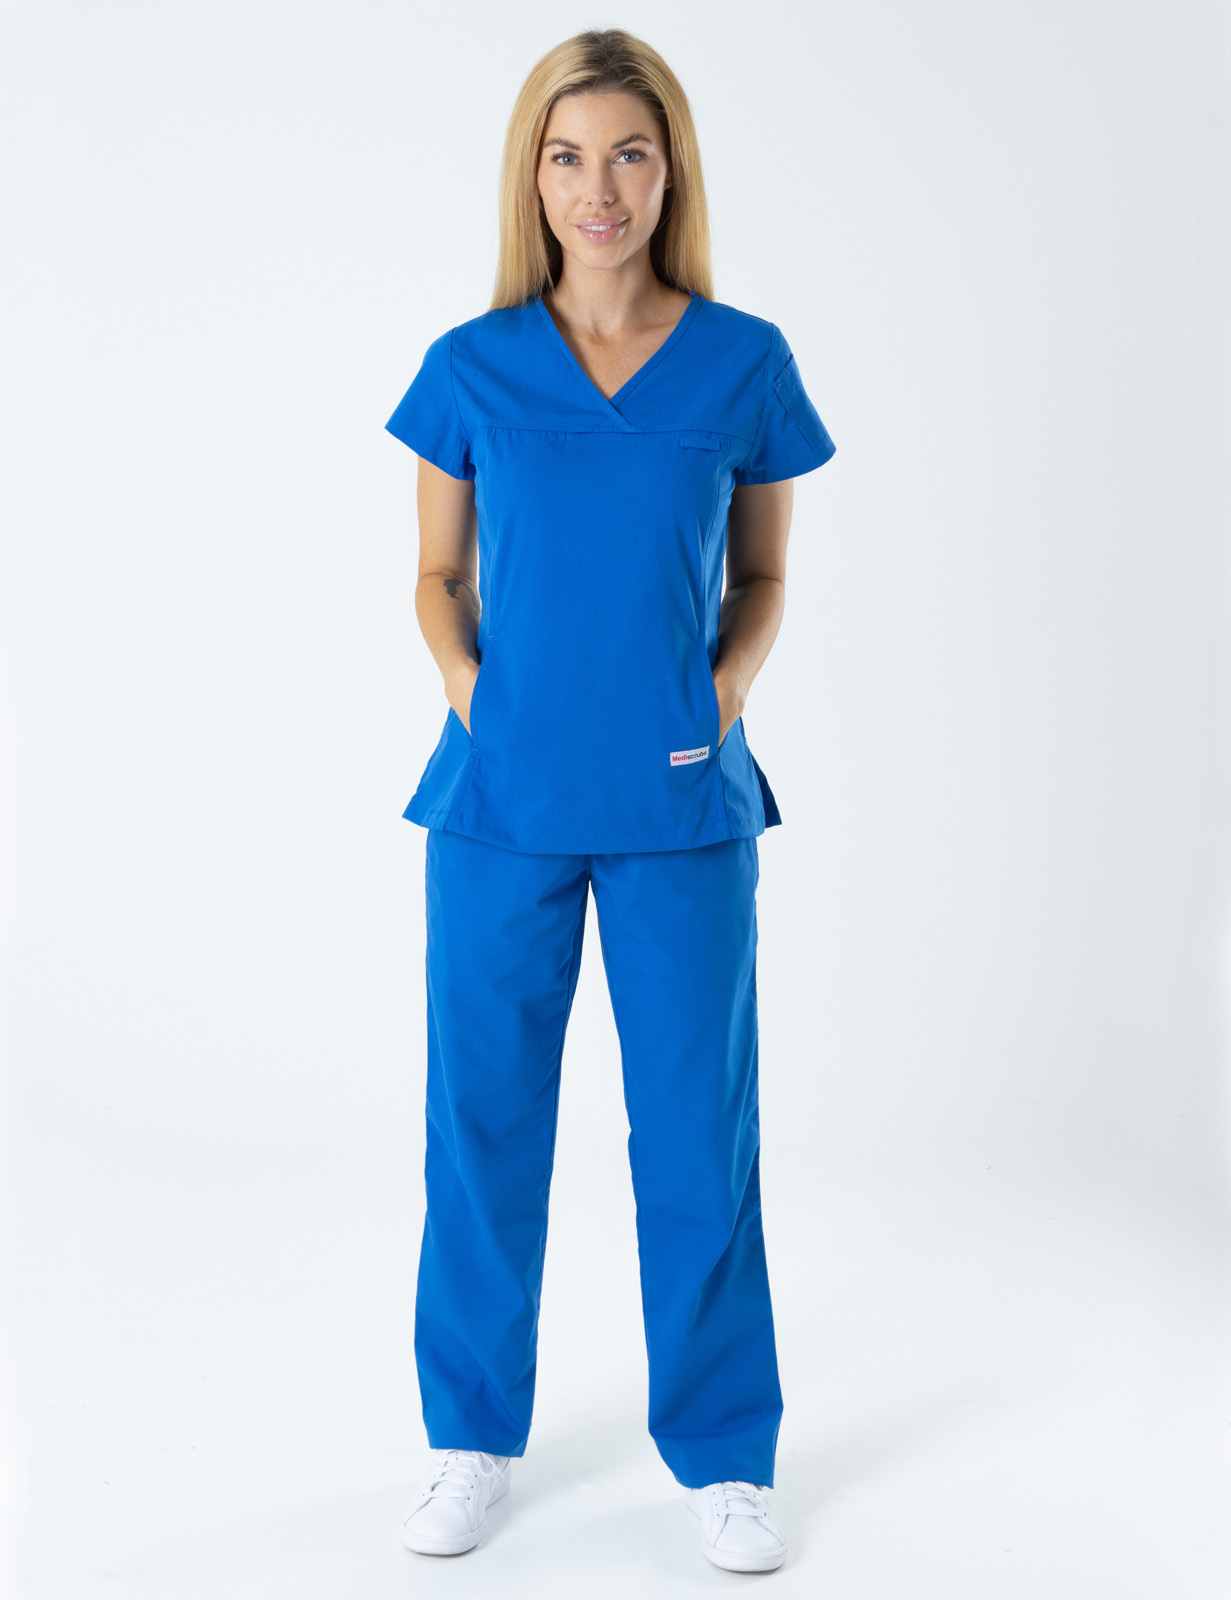 Canberra Hospital Medical Imaging Radiographer Uniform Set Bundle (Women's Fit Solid Top and Cargo Pants in Royal + Logos)